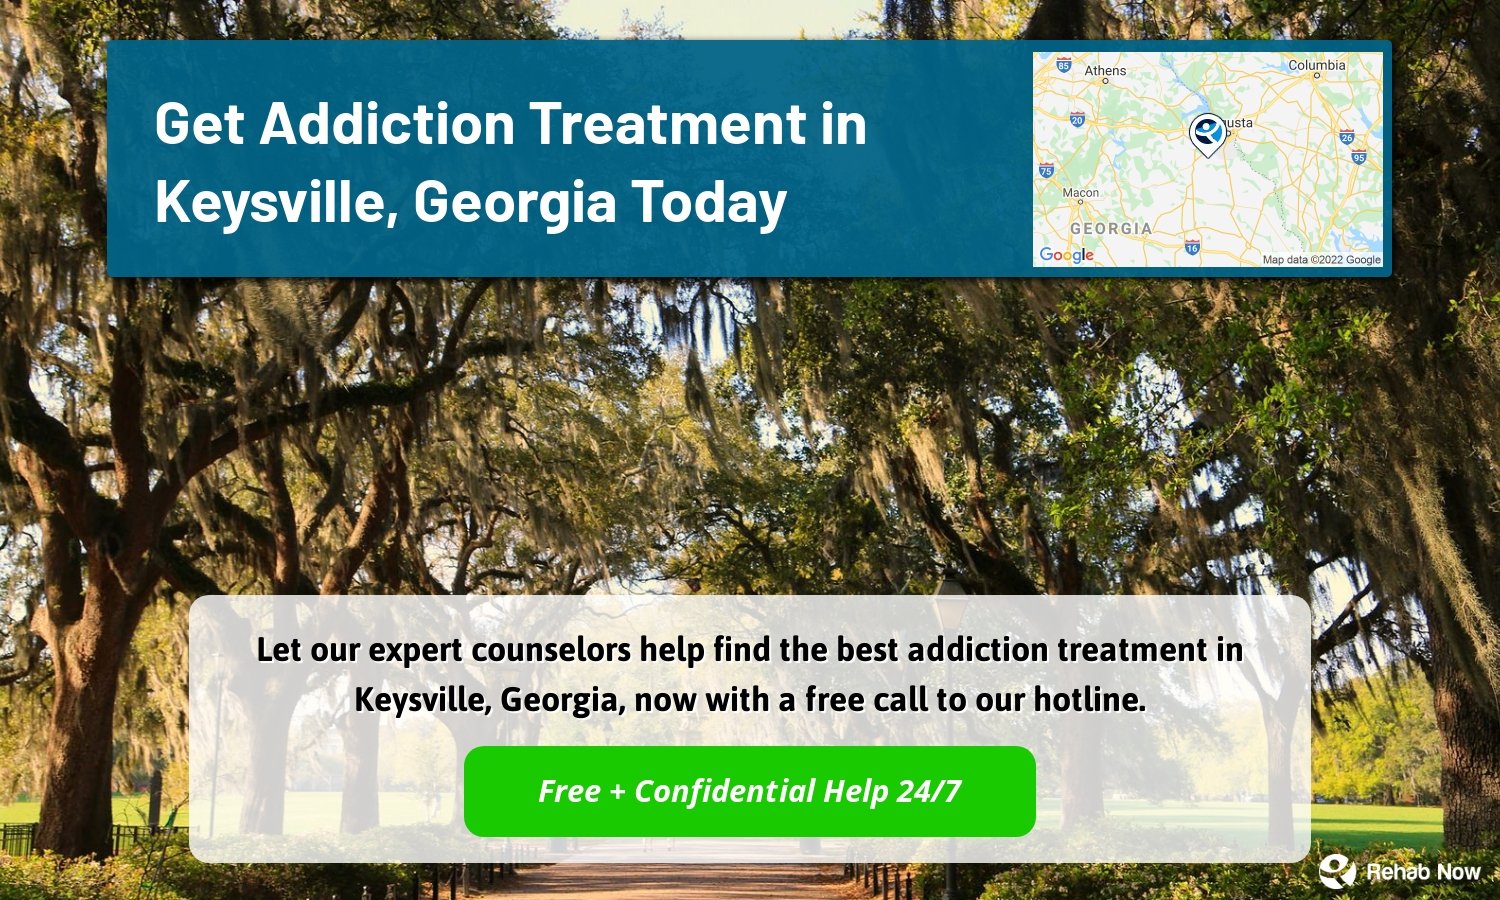 Let our expert counselors help find the best addiction treatment in Keysville, Georgia, now with a free call to our hotline.